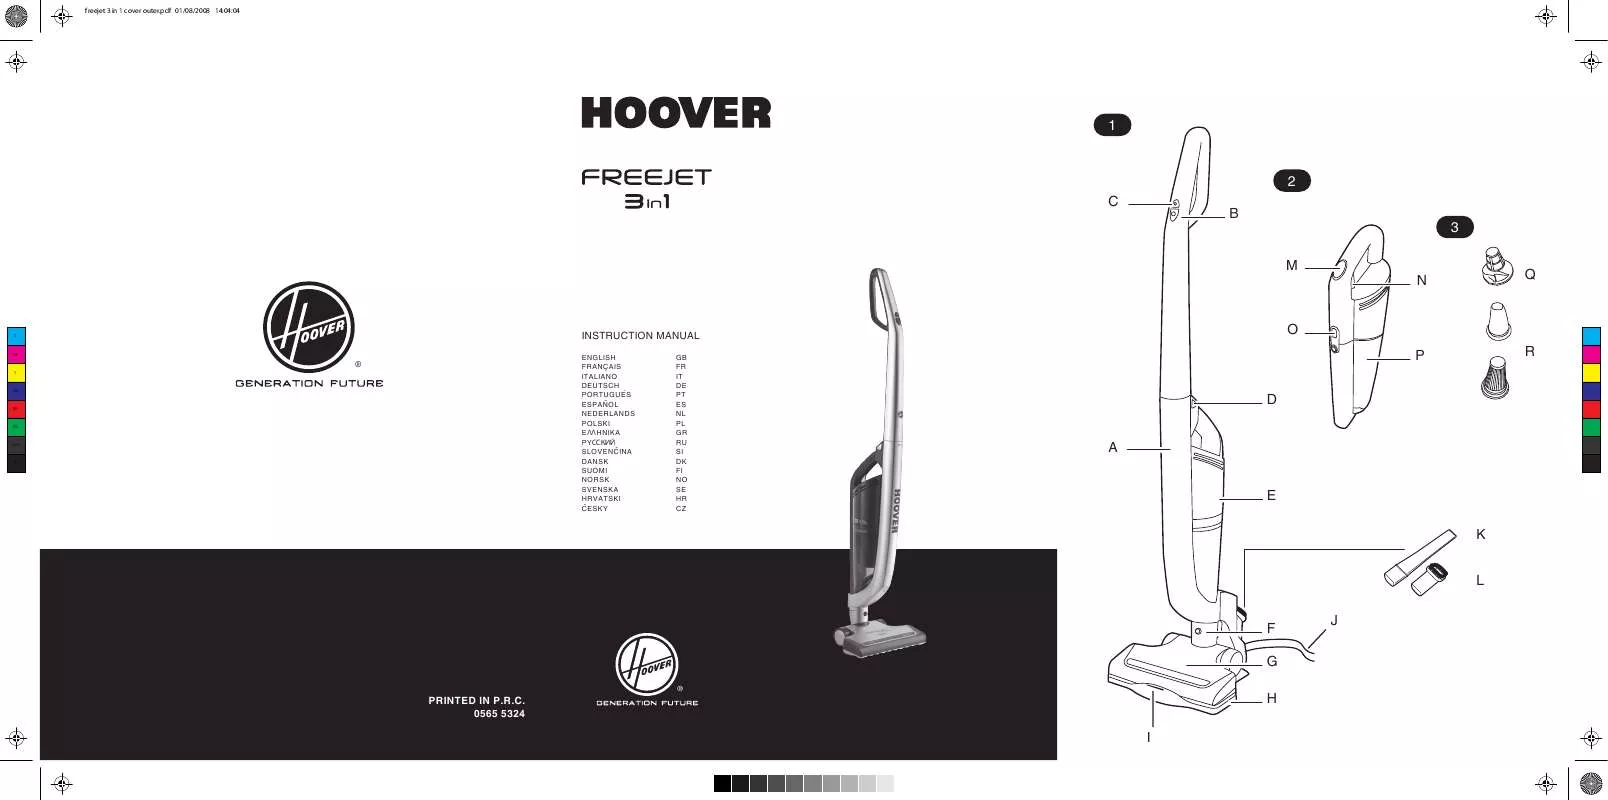 Mode d'emploi HOOVER FREEJET 3IN1